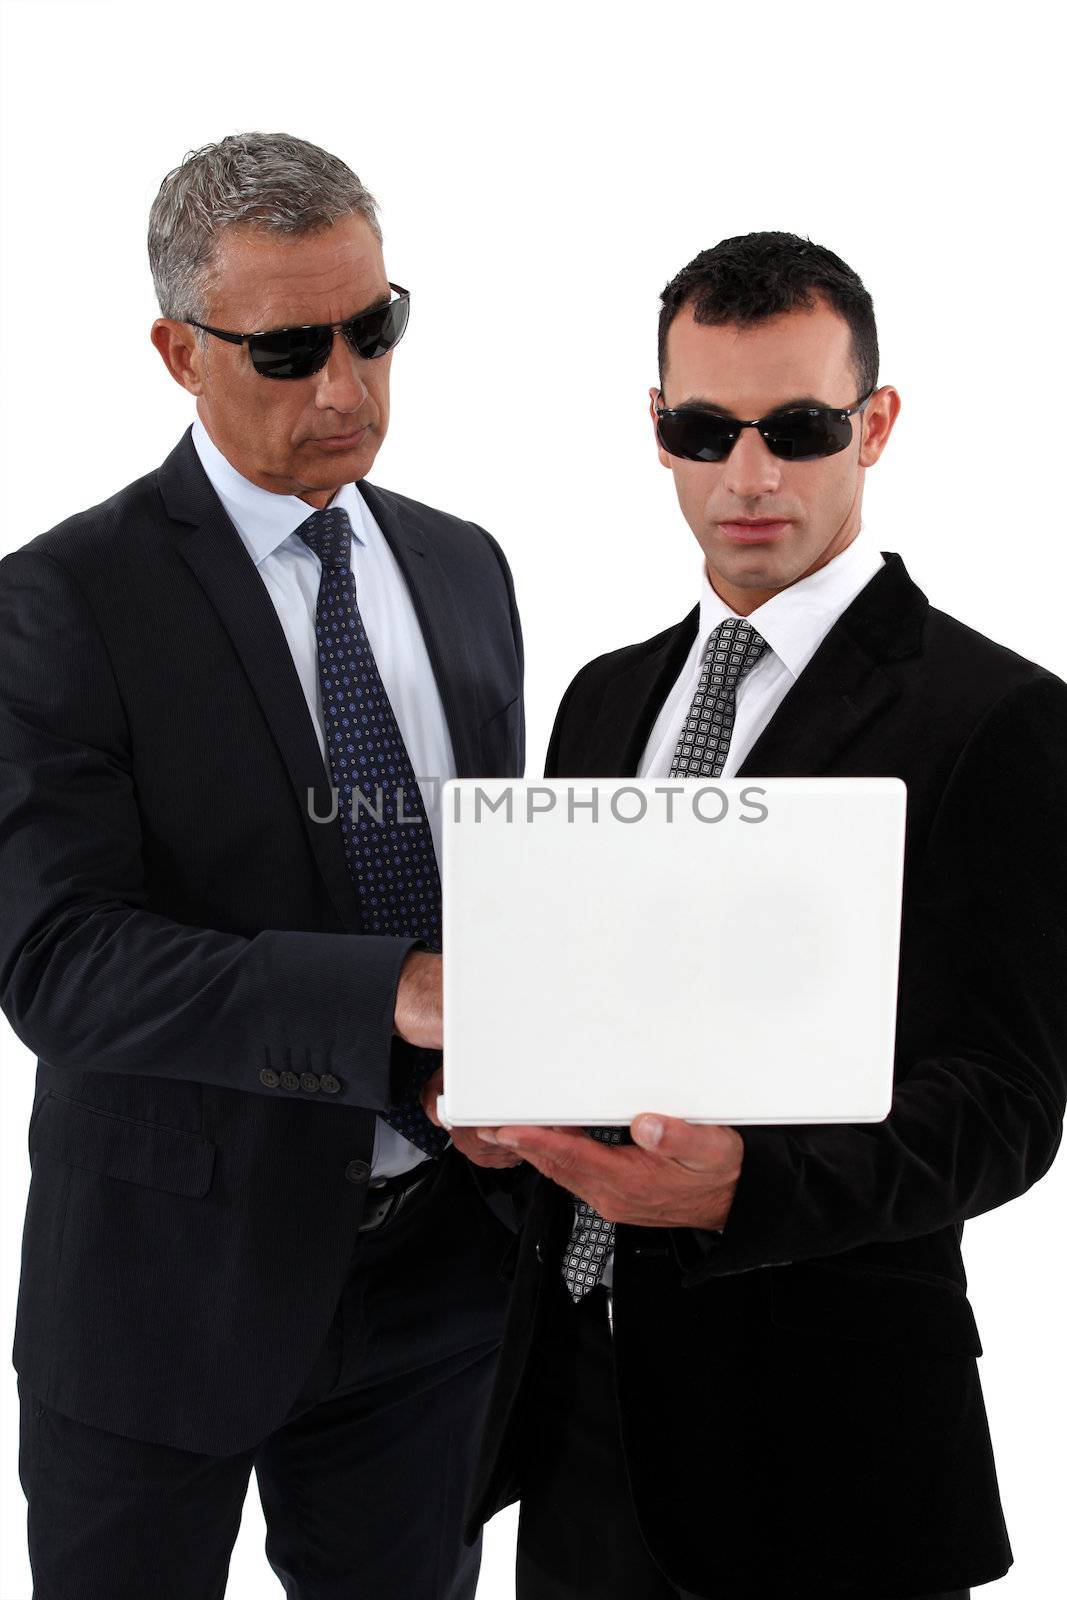 Businessmen wearing sunglasses and looking at a laptop by phovoir